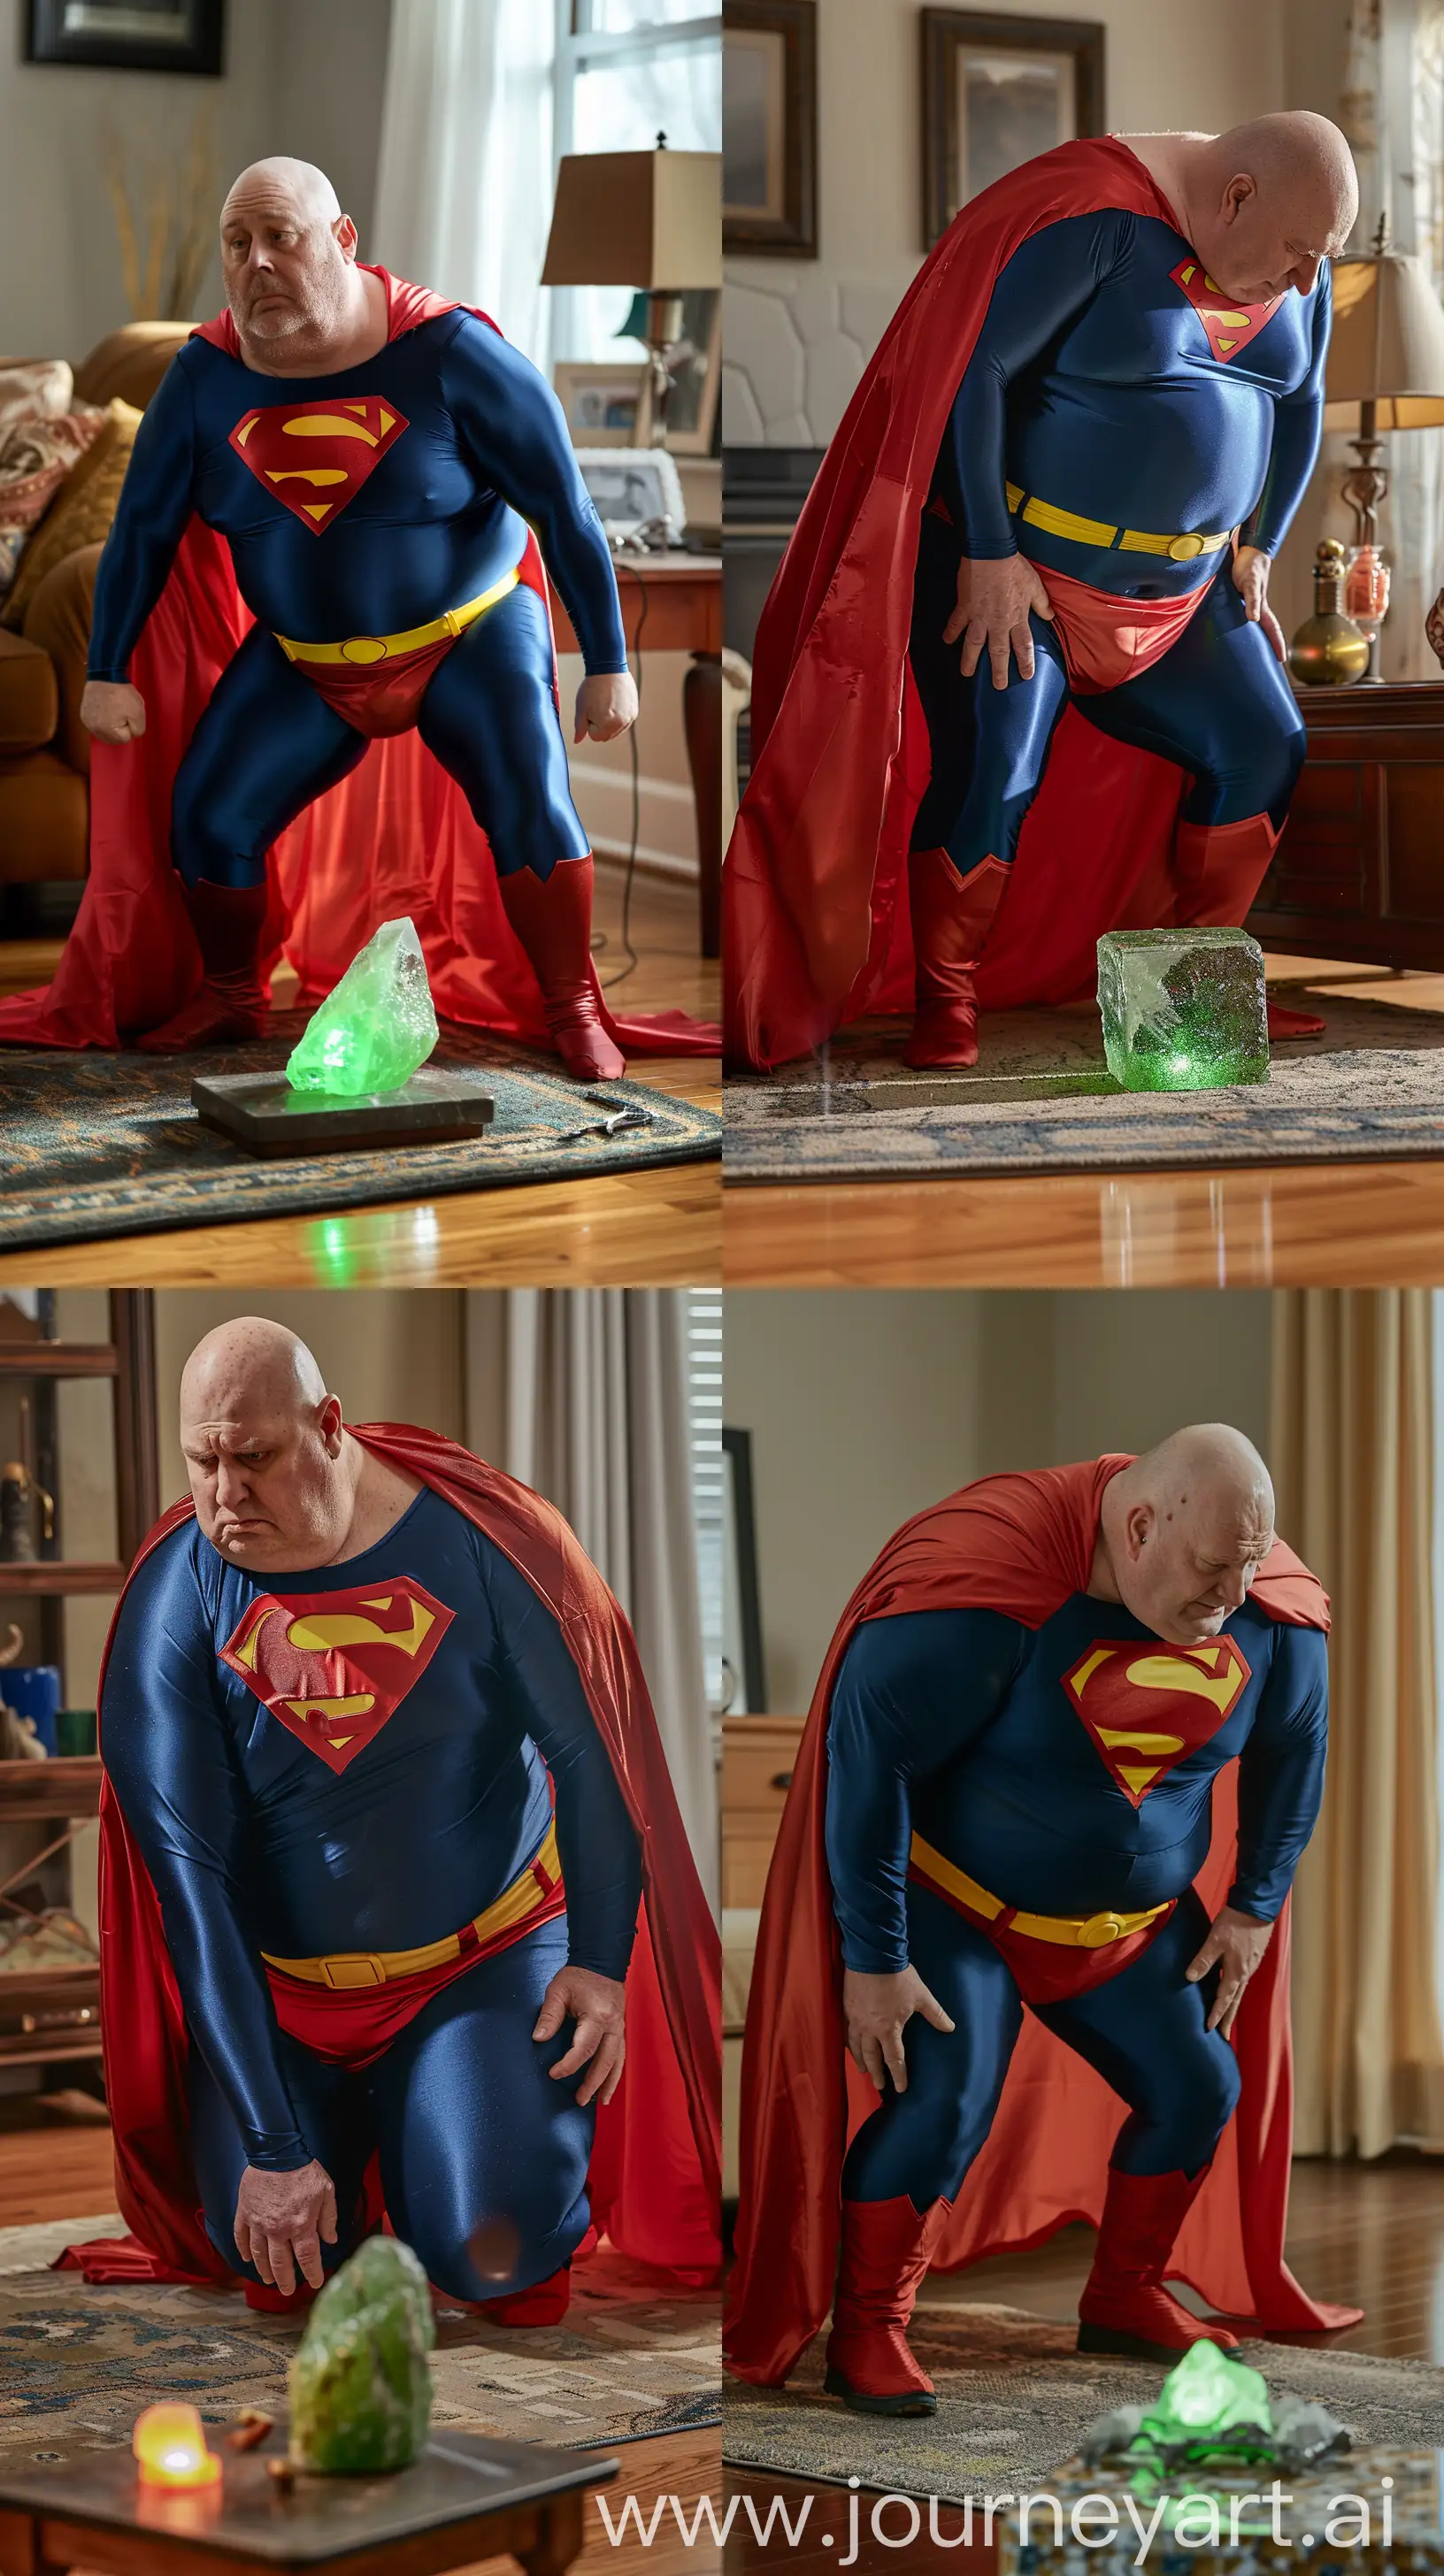 Superman-Fan-Pays-Tribute-to-Iconic-Hero-with-Kneeling-Pose-and-Glowing-Rock